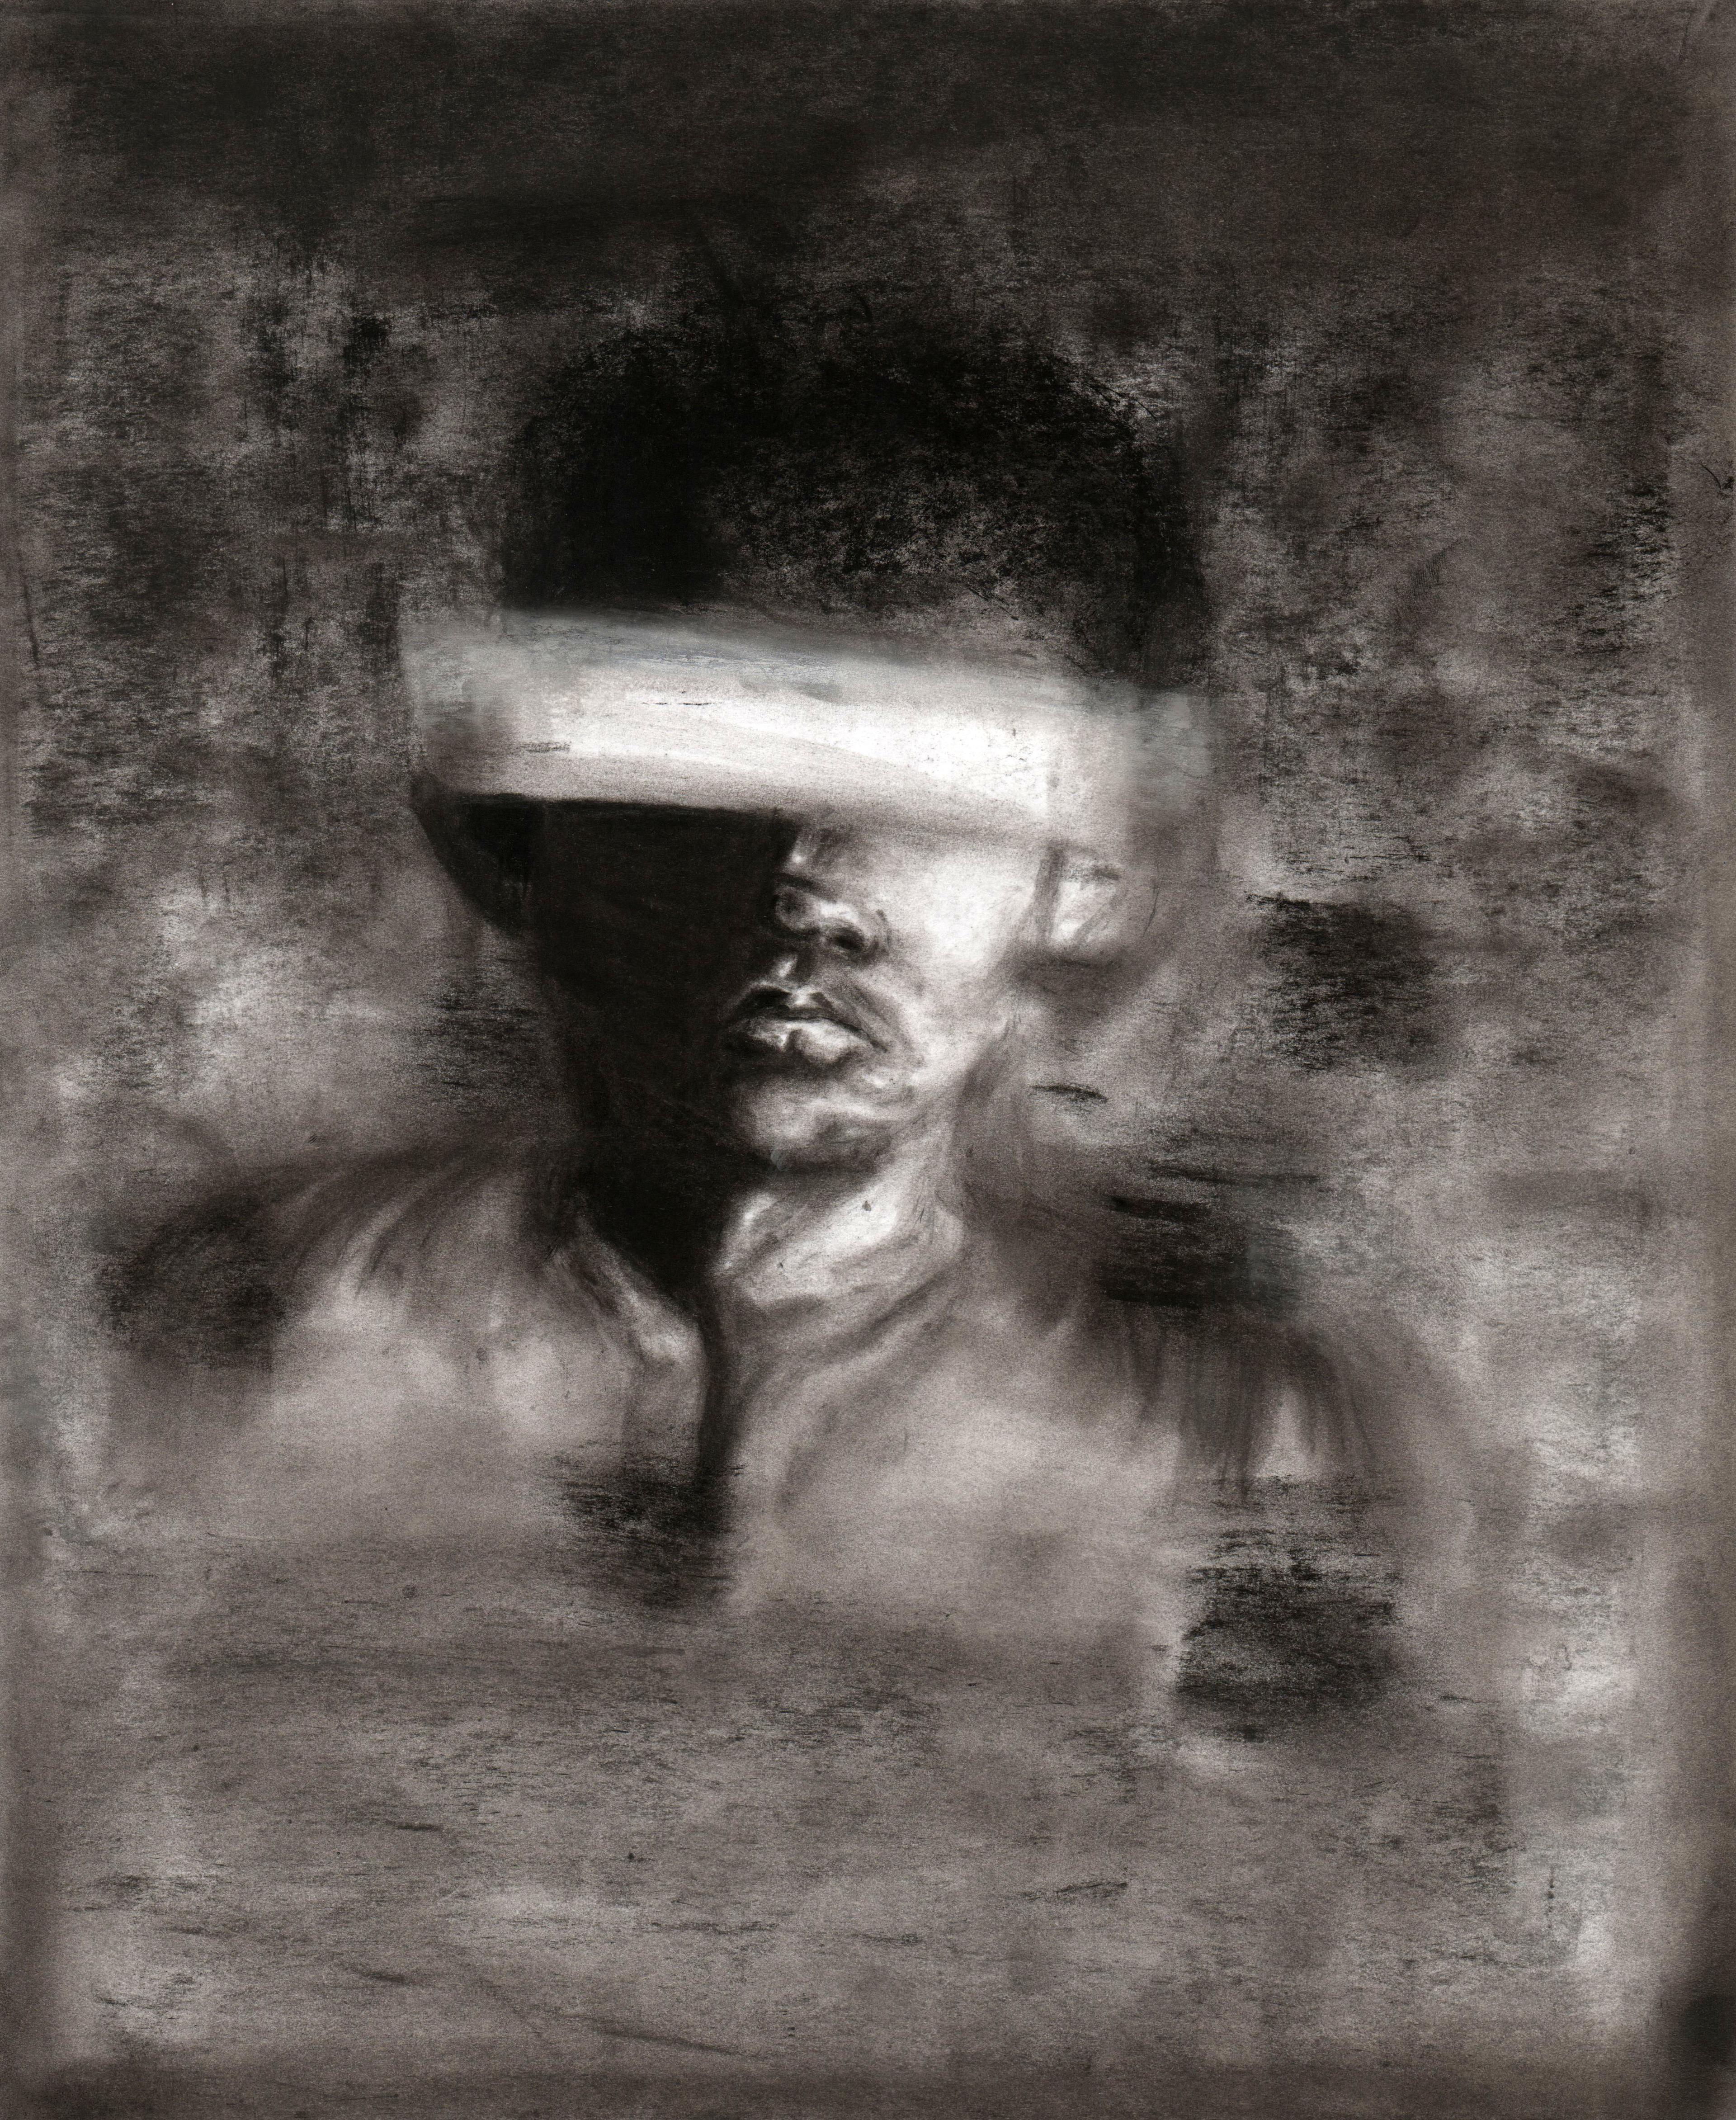 Charcoal gray self-portrait of a dark-haired adolescent boy facing the viewer with a stony, closed mouth expression on his face. The boy's eyes are crossed out horizontally as if to suggest a white blindfold. The boy wears a gray shirt and emerges from a dark gray background in vignette. The right side of the boy's face is fully shrouded in black shadow.